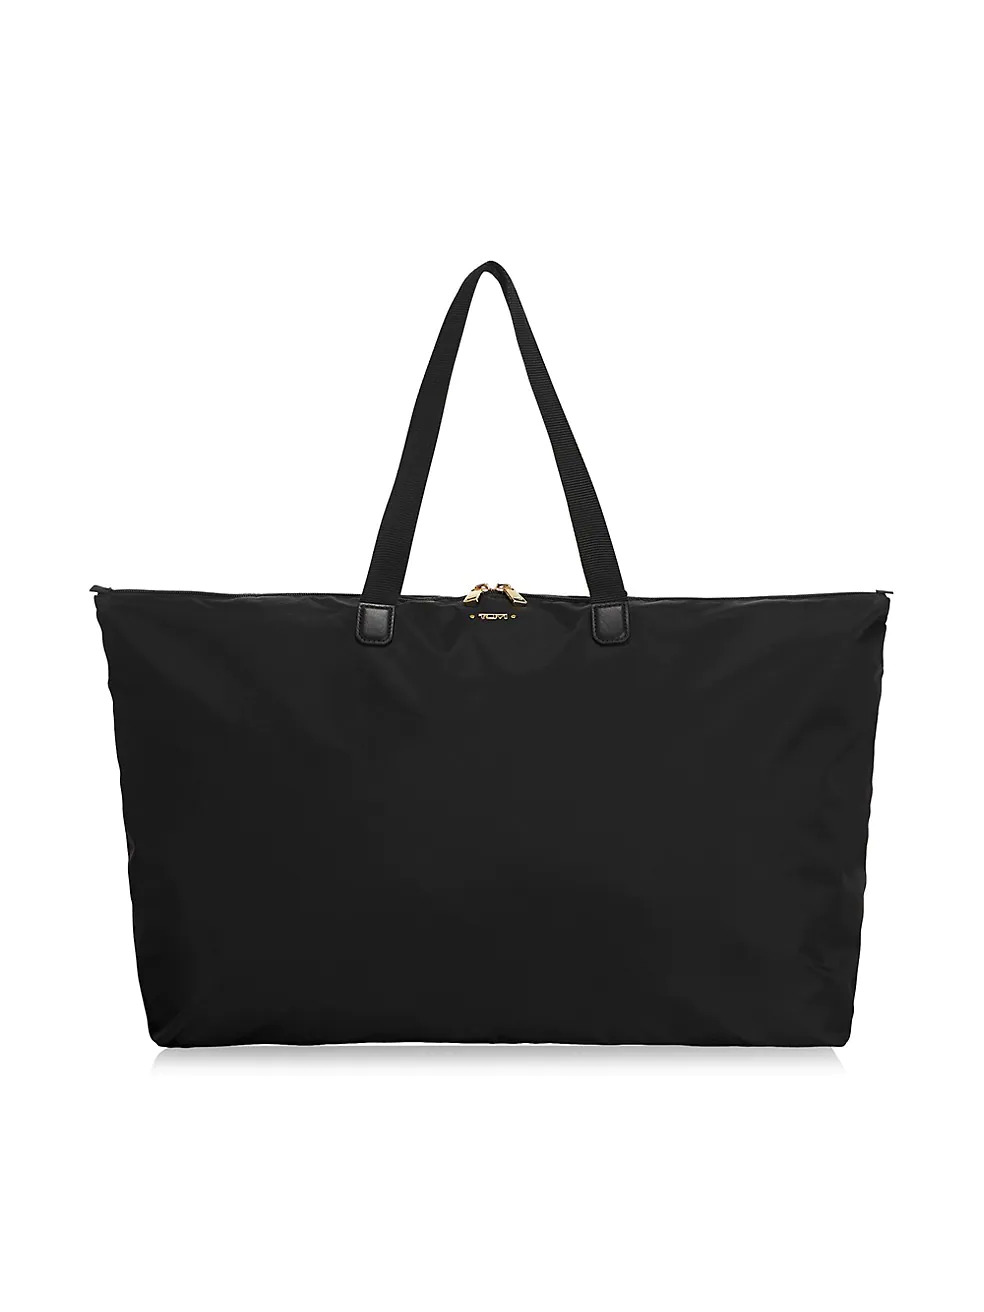 TUMI Voyageur Just In Case Tote - Black/Gold $80